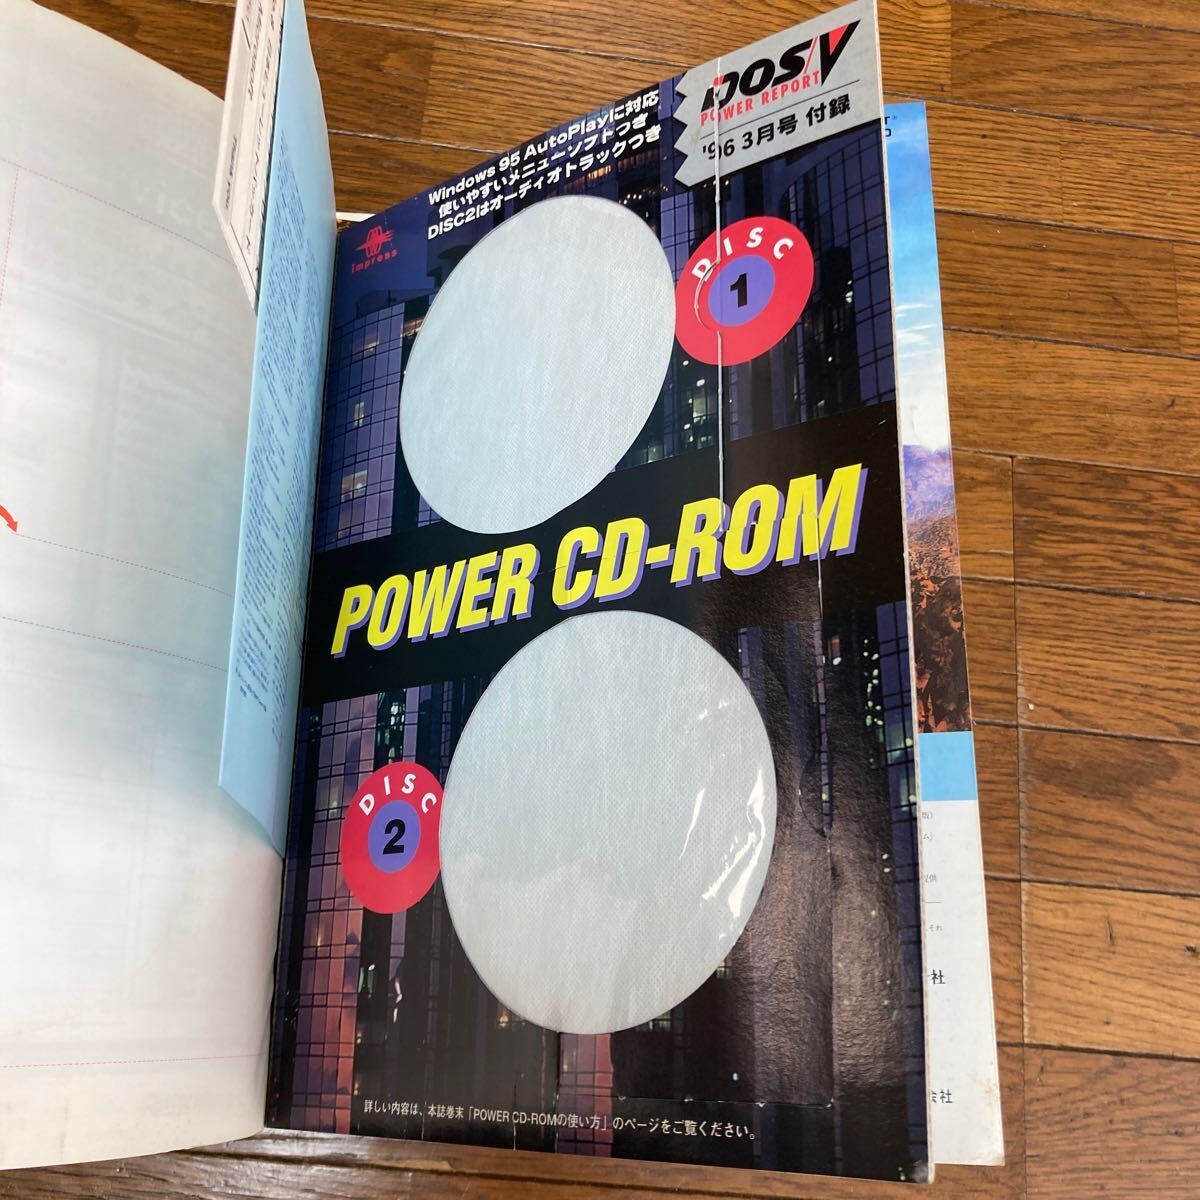 DOS/V POWER REPORT 1996年版　ドスブイパワーレポート　雑誌　不揃い9冊セット　まとめ売り_画像5